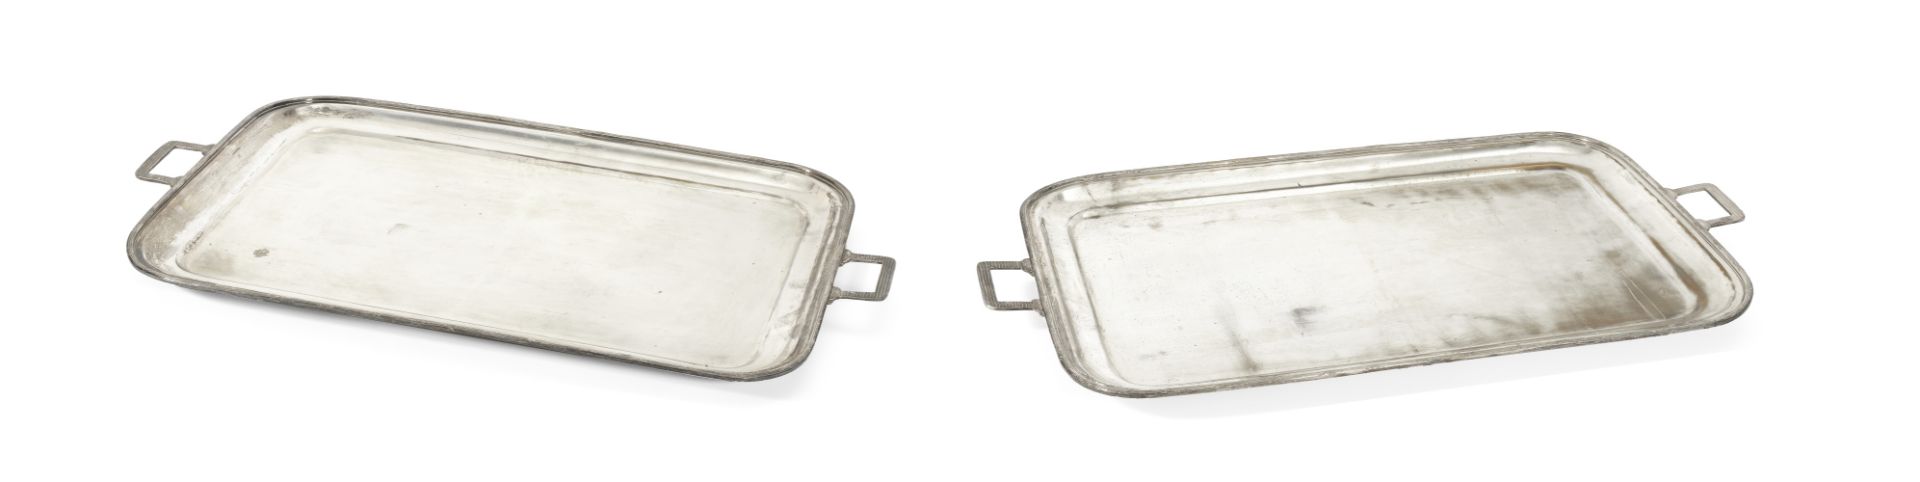 A pair of large silver-plated butler's trays 20th century (2)